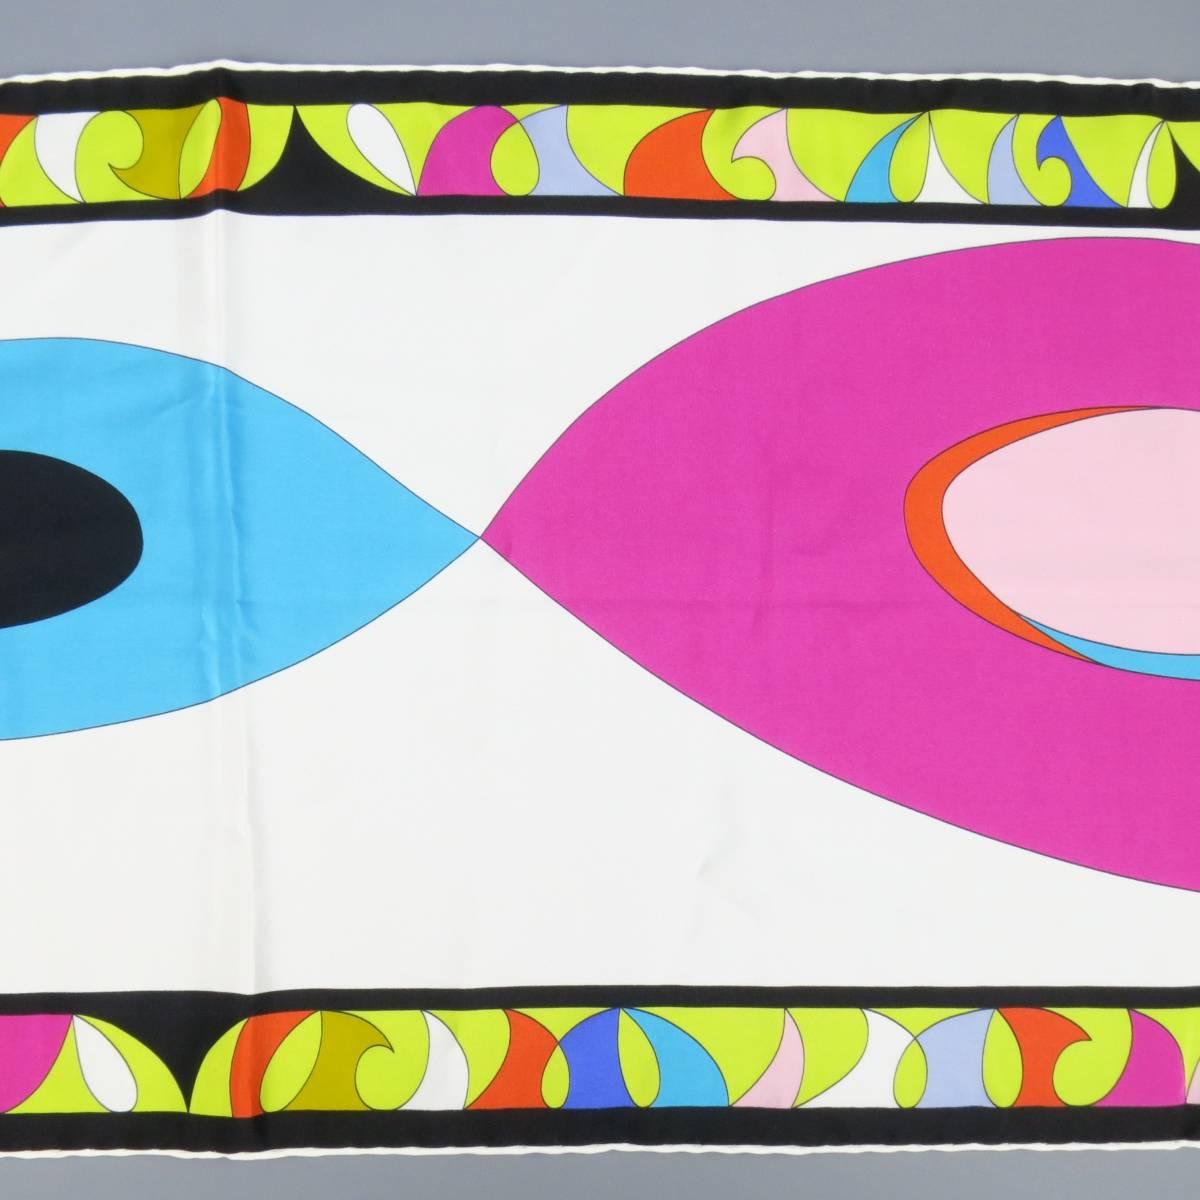 EMILIO PUCCI silk scarf features a multi-colored abstract geometric print with hues of fucsia, pink, orange, blue, and green on a black and white base. Made in Italy.
 
Excellent Pre-Owned Condition.
 
12.5 x 51 in.